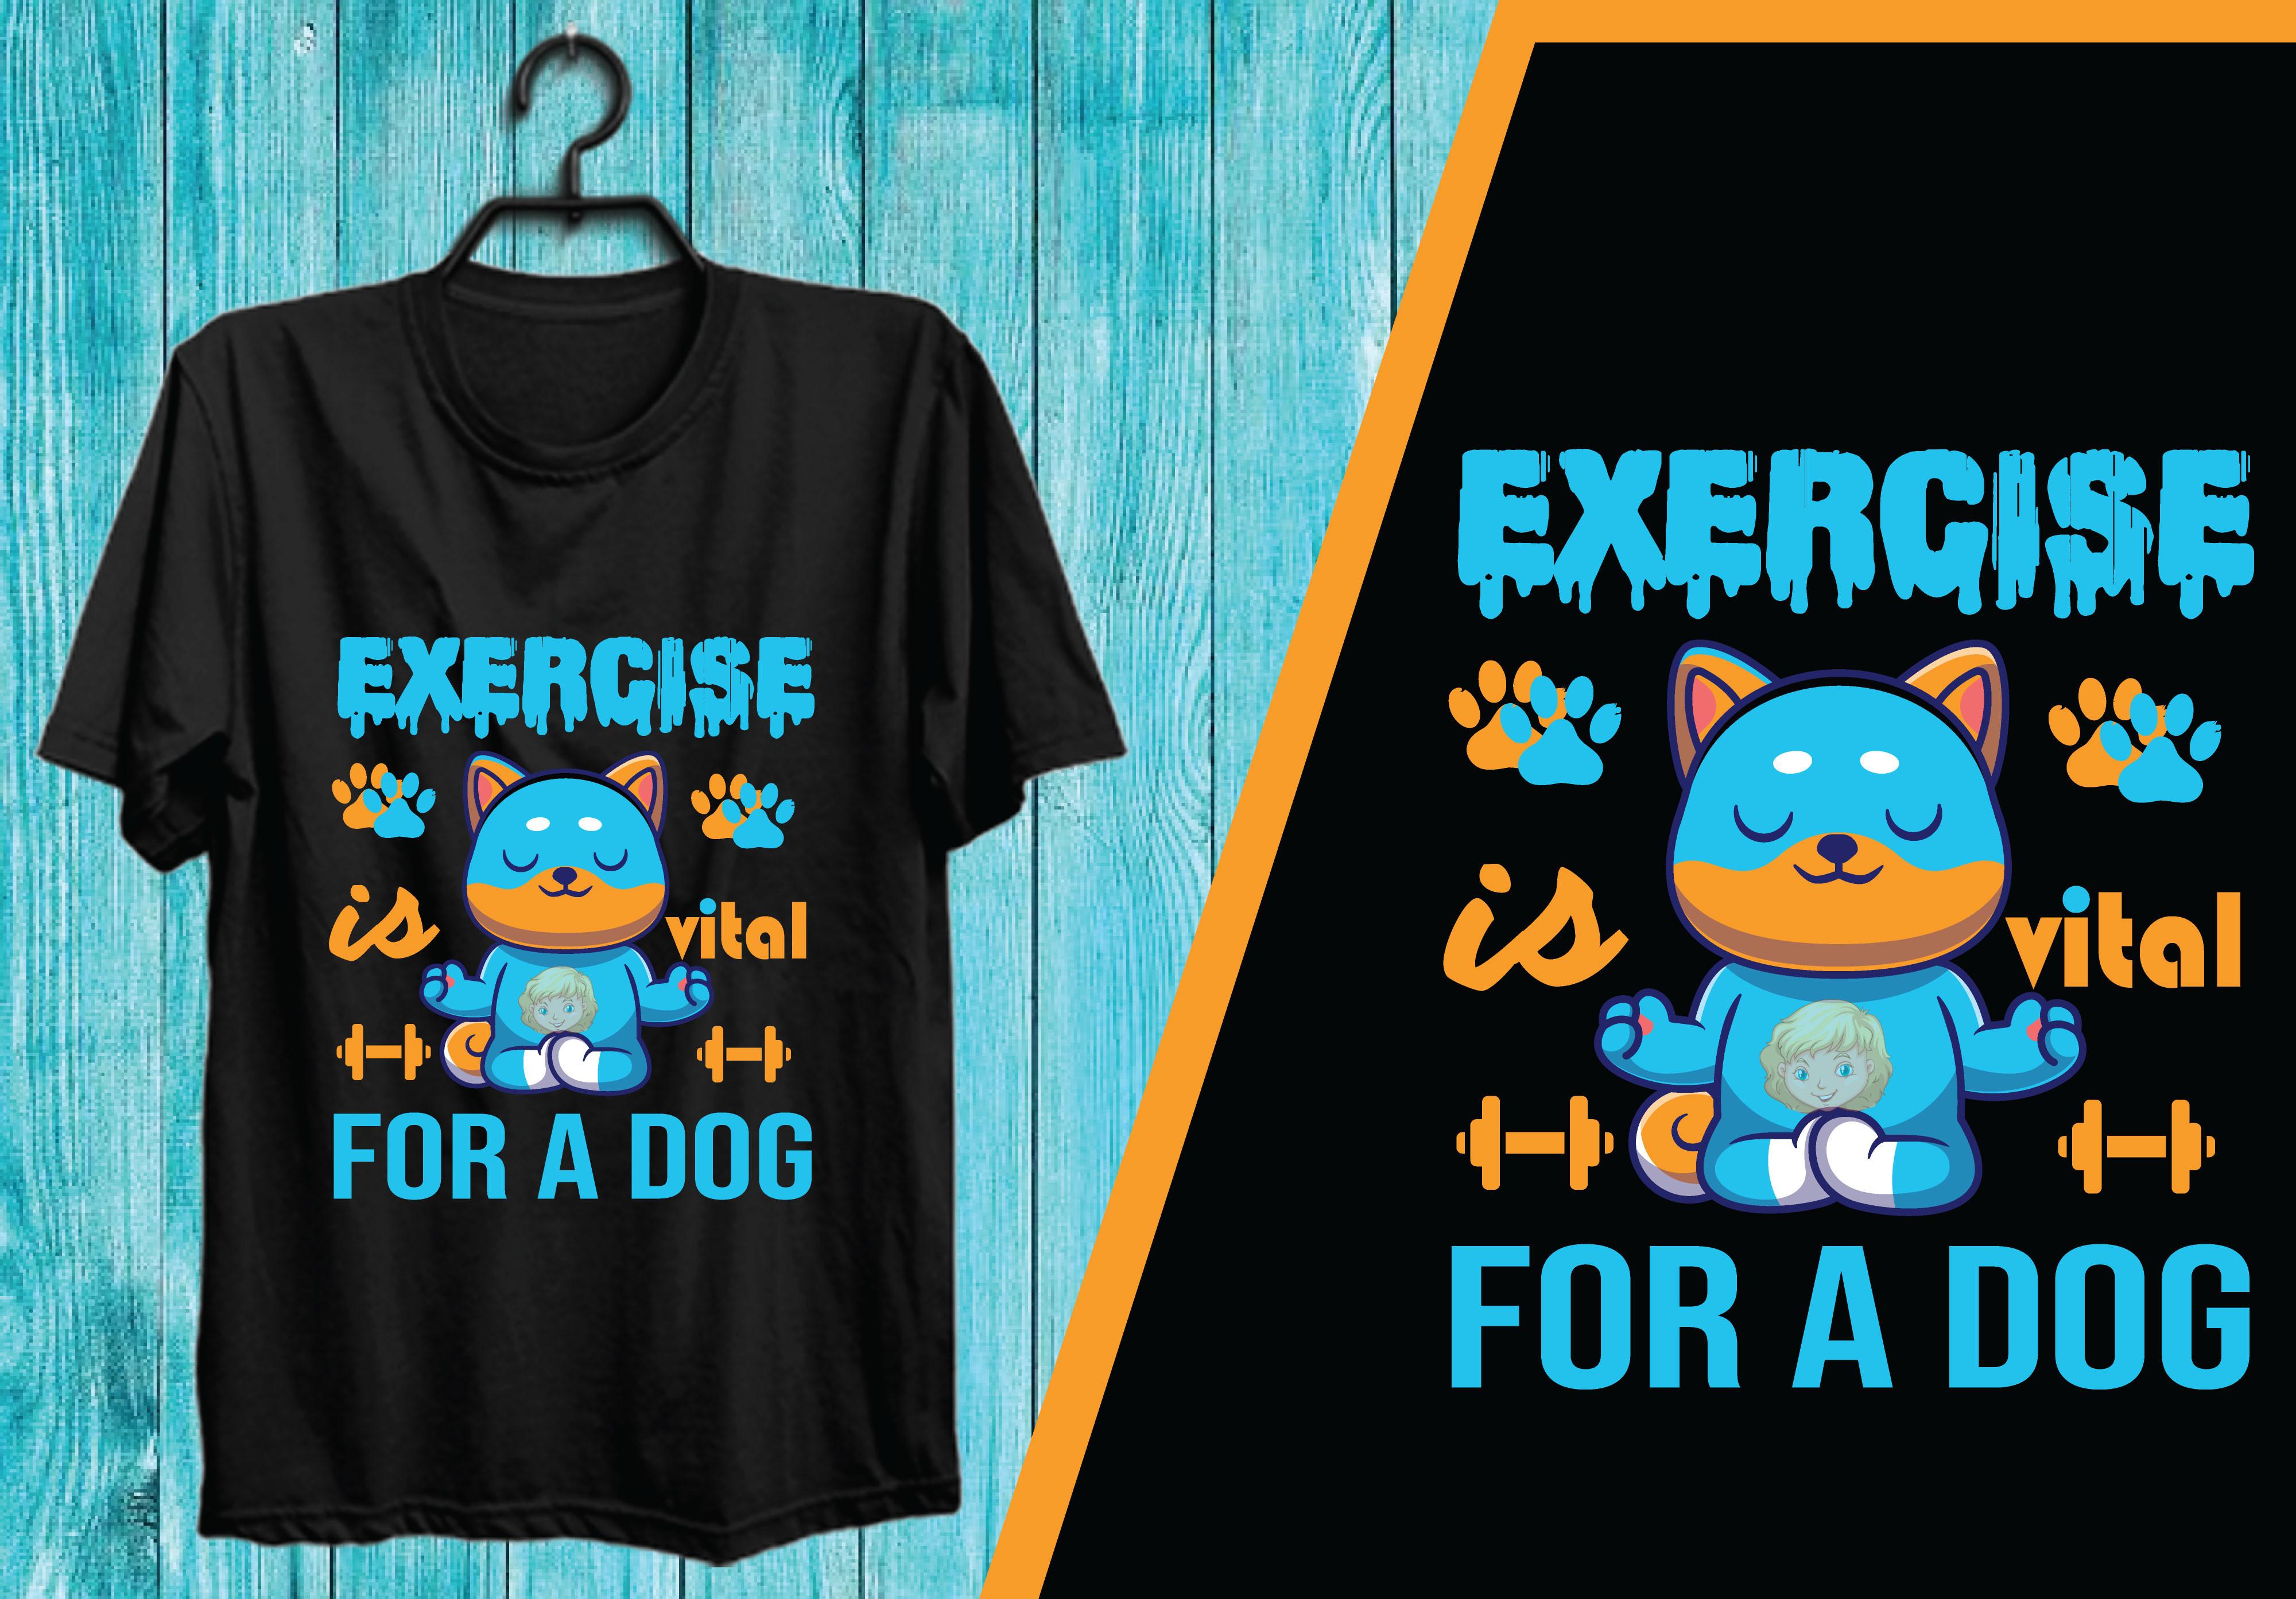 Exercise is Vital for a Dog